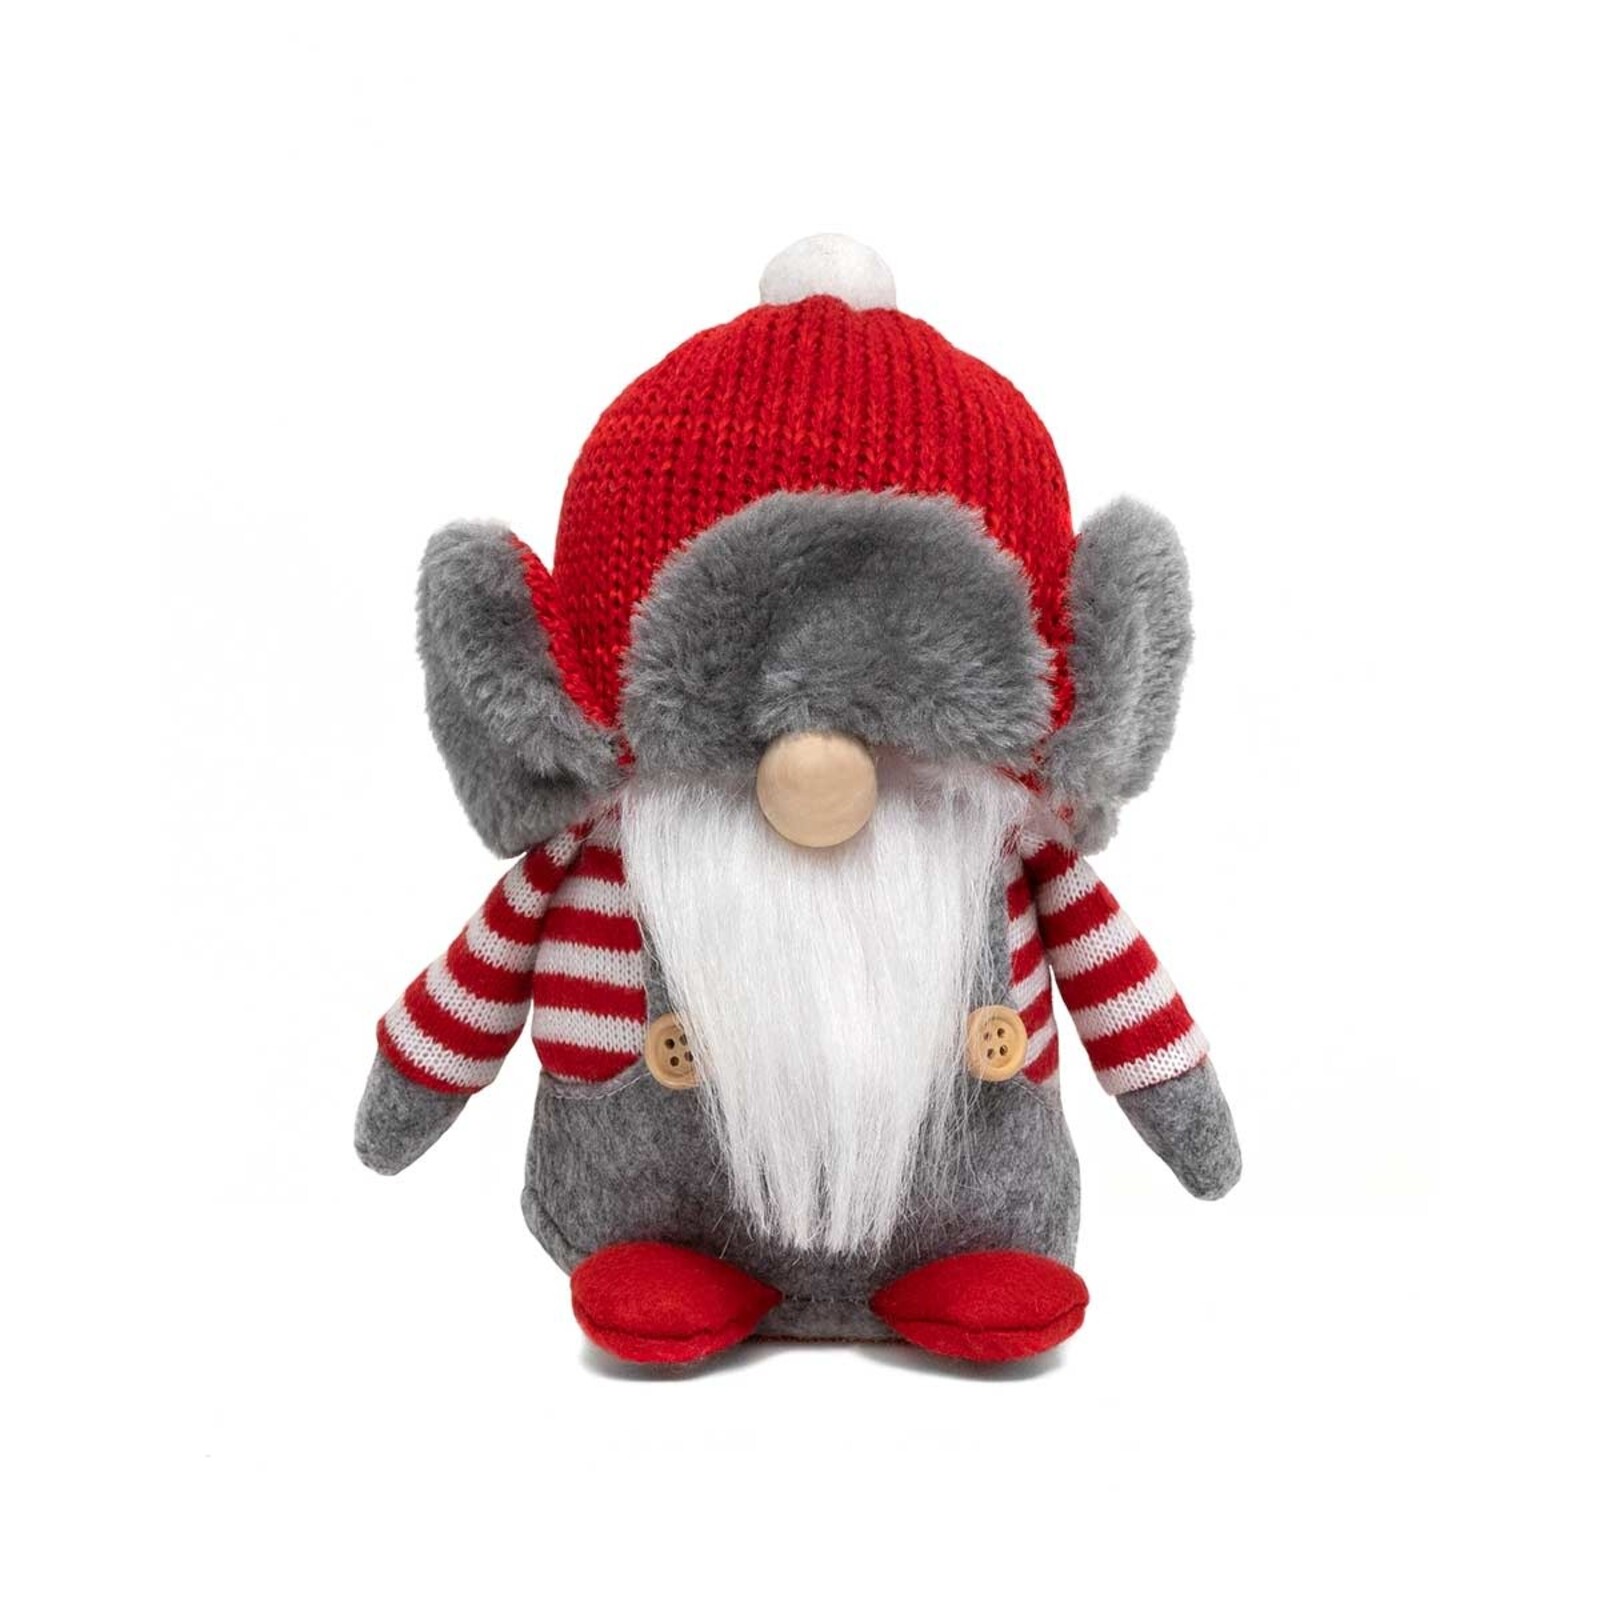 Meravic COUSIN EDDY GNOME WITH RED/GREY FLAP HAT SMALL   R9734 loading=